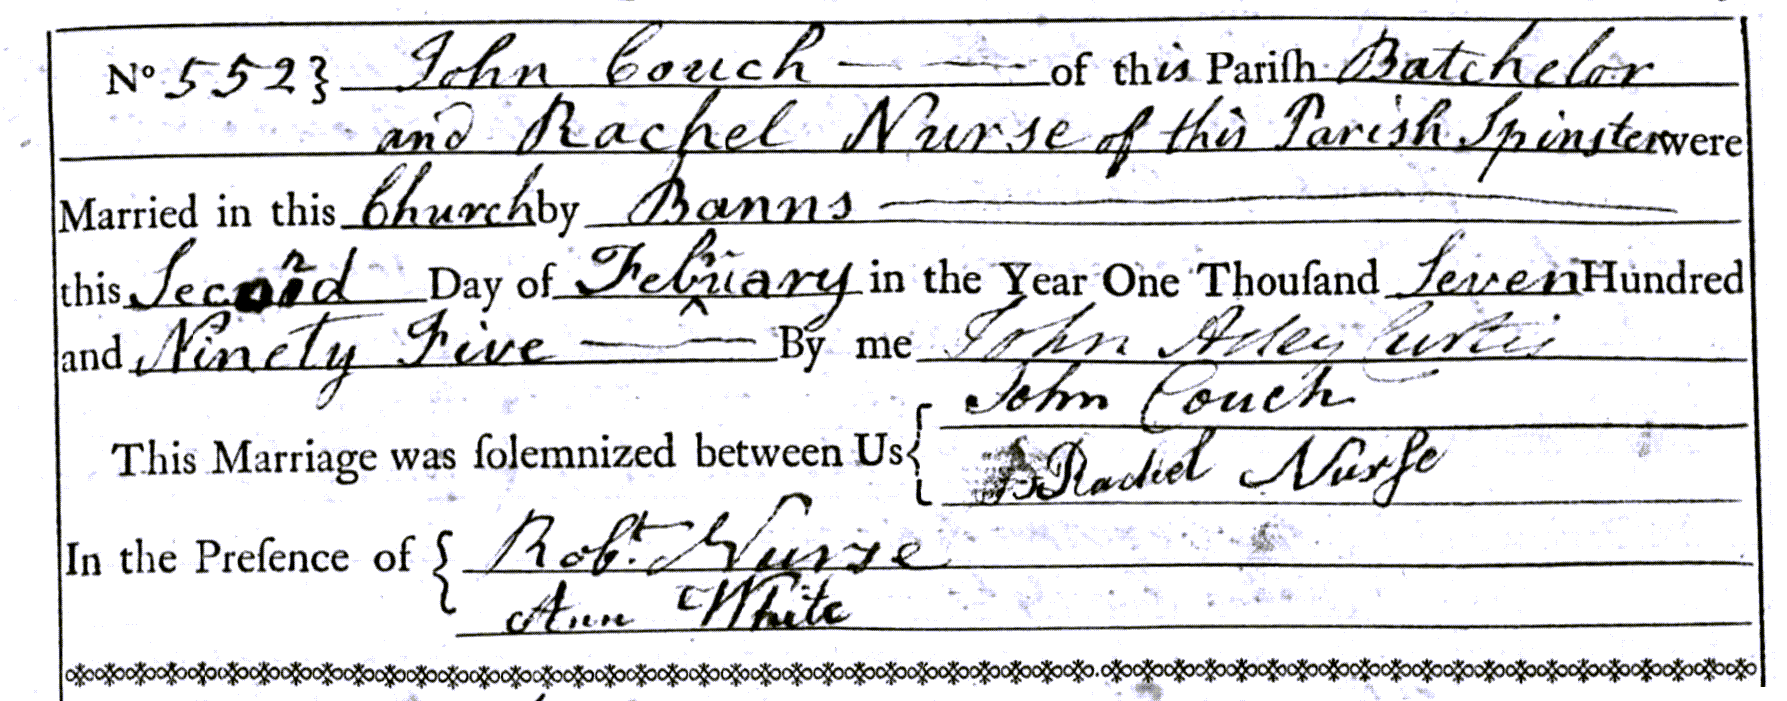 Figure 1: Marriage Register Entry for John Couch and Rachel Nurse